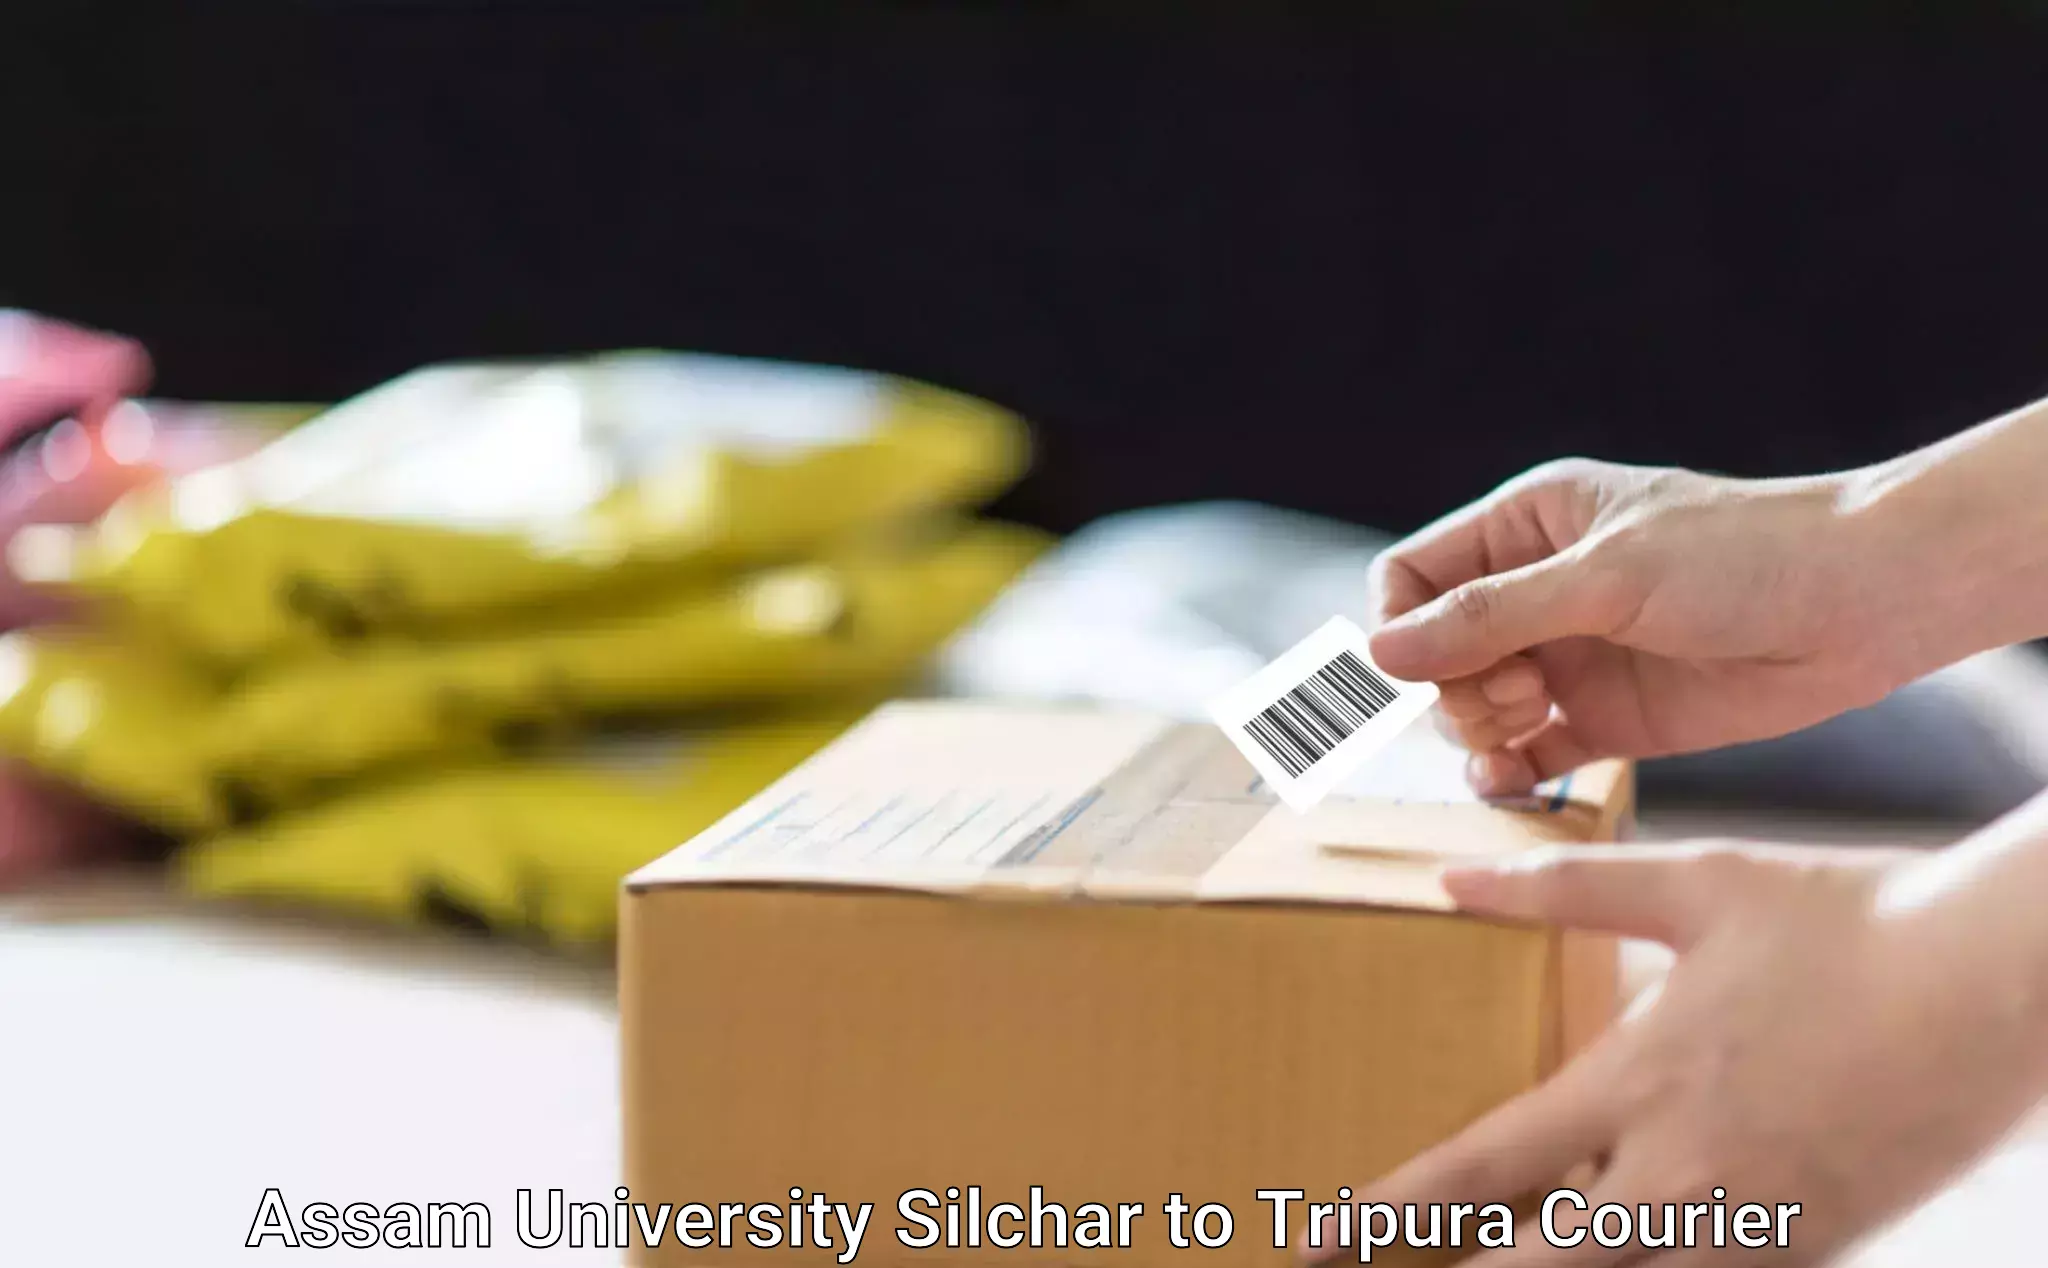 Package delivery network Assam University Silchar to North Tripura